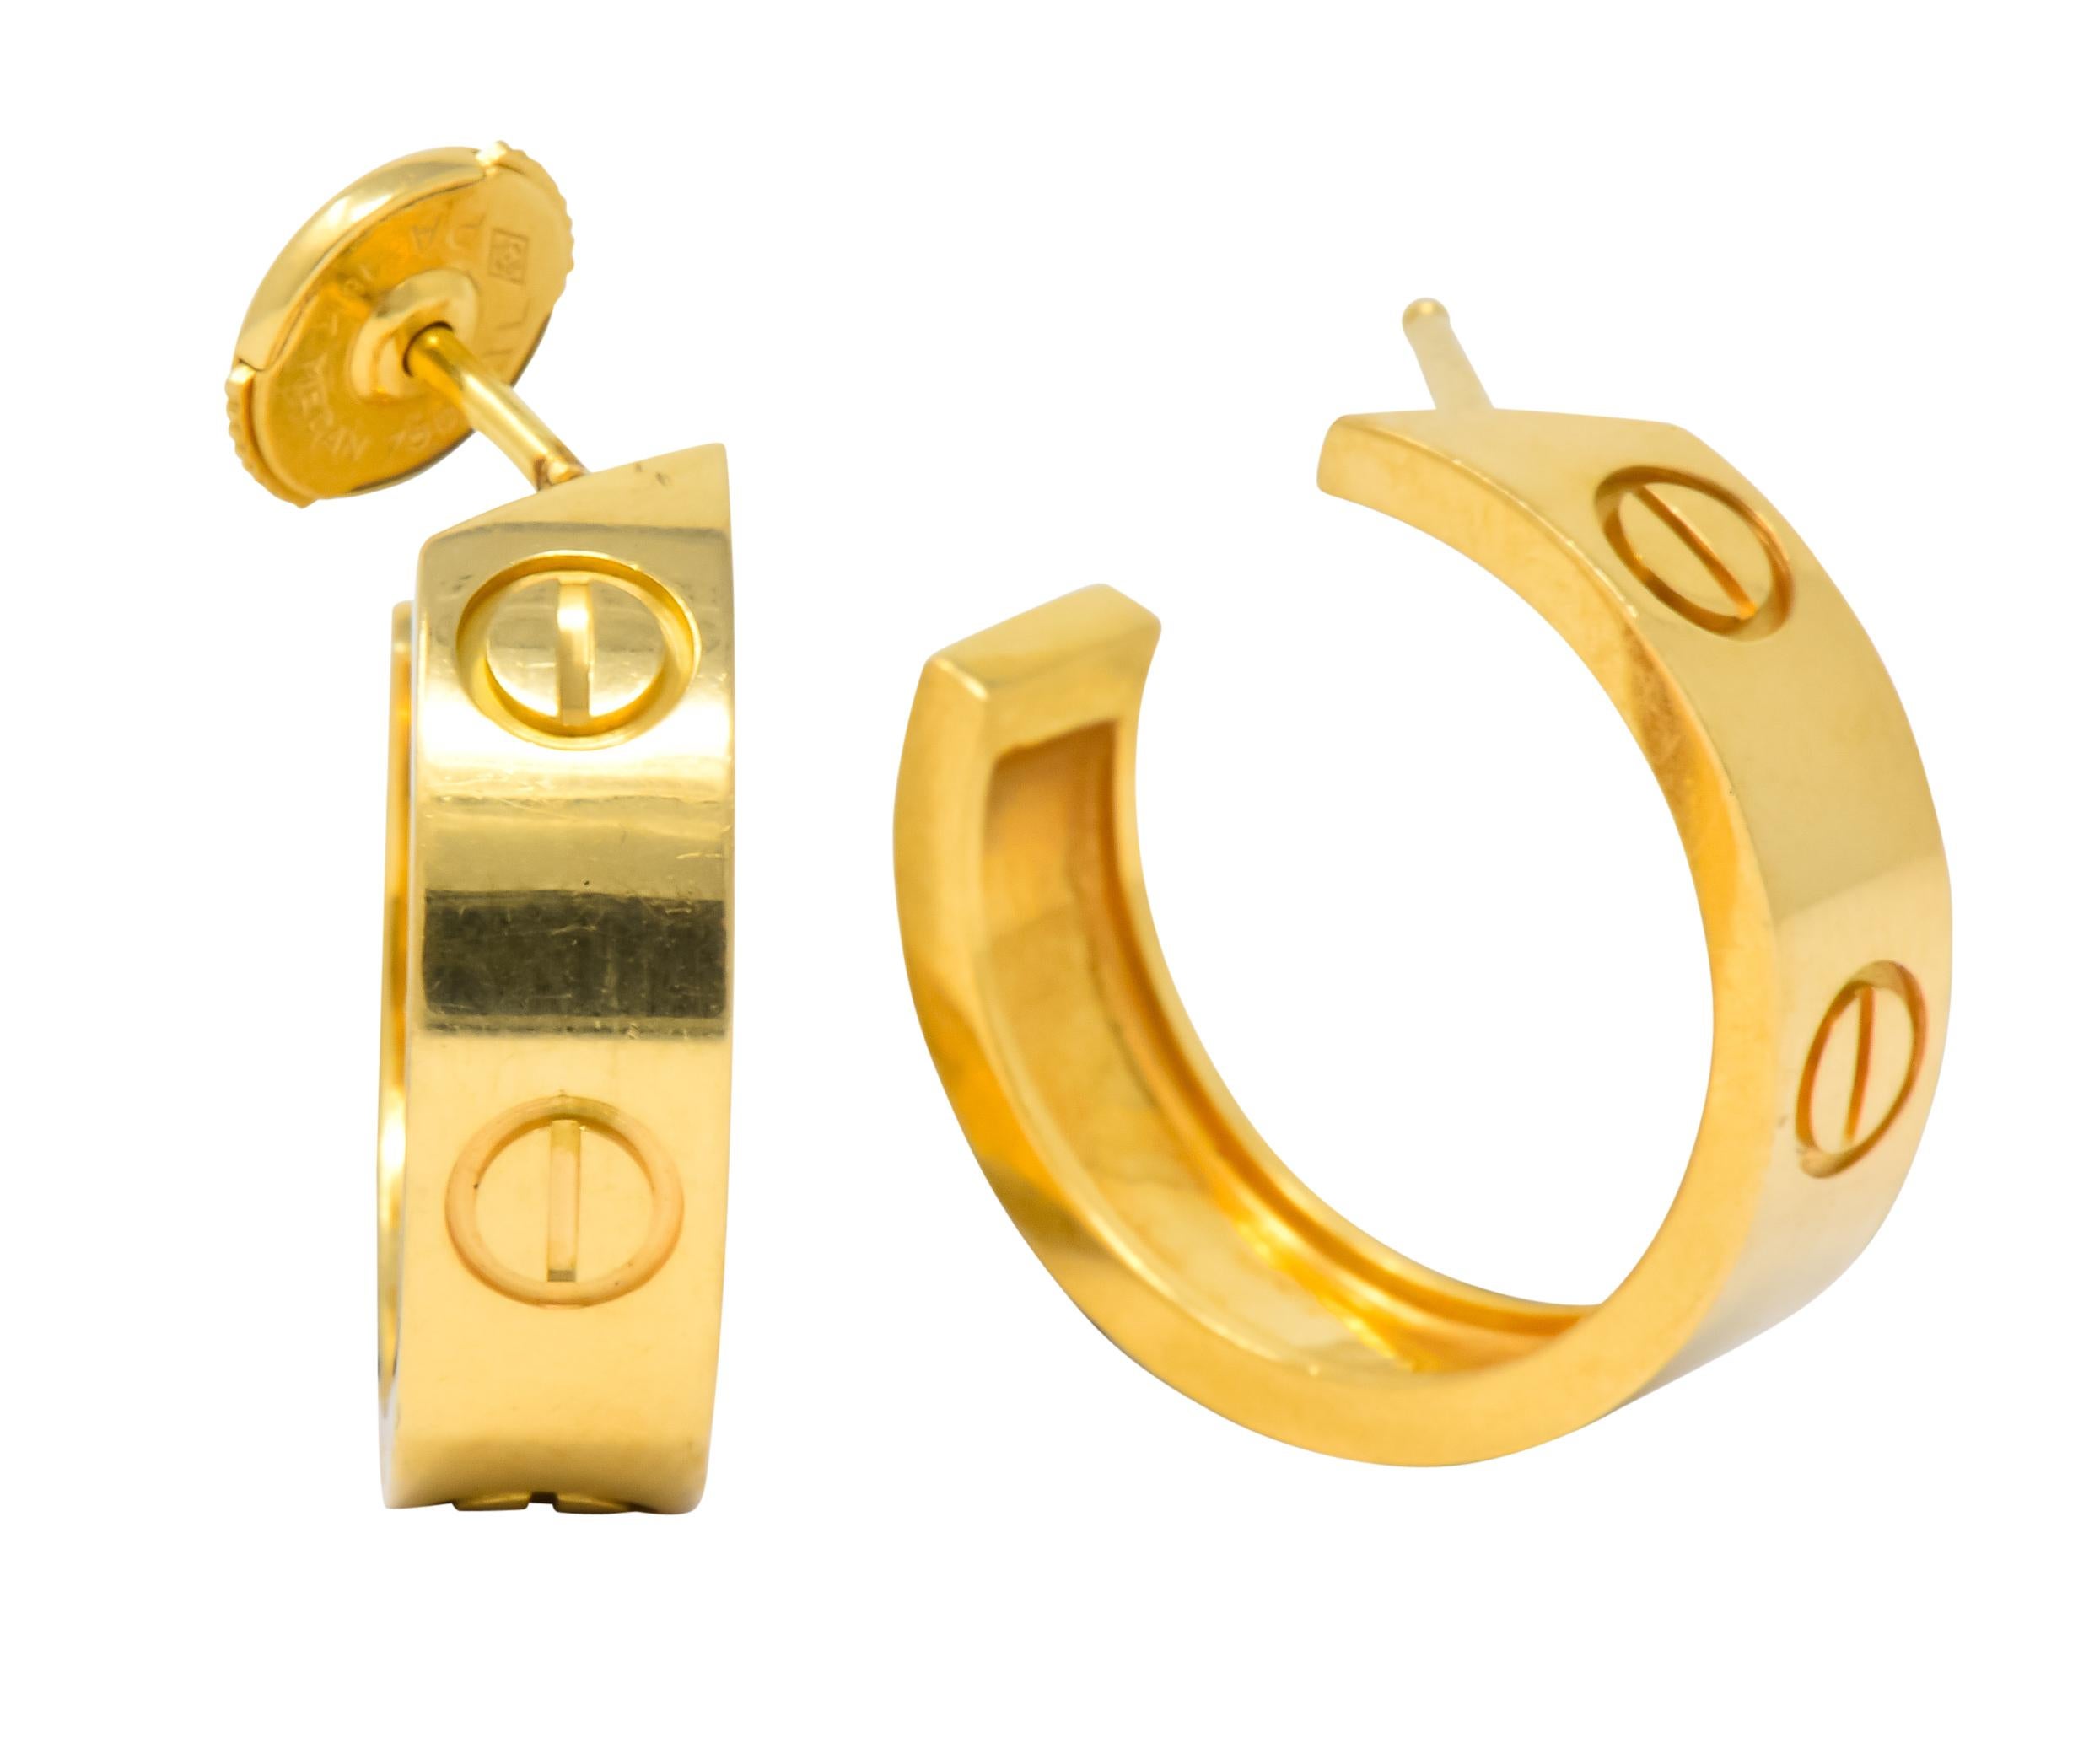 Designed as hoops with posts and stamped screw head detail

La pousette backs 

From the coveted Cartier Love collection

Fully signed and numbered, stamped 750

Measures: 4 1/2 x 1/4 (width) inches

Inner Diameter: 3/4 inch

Crisp. Classic.